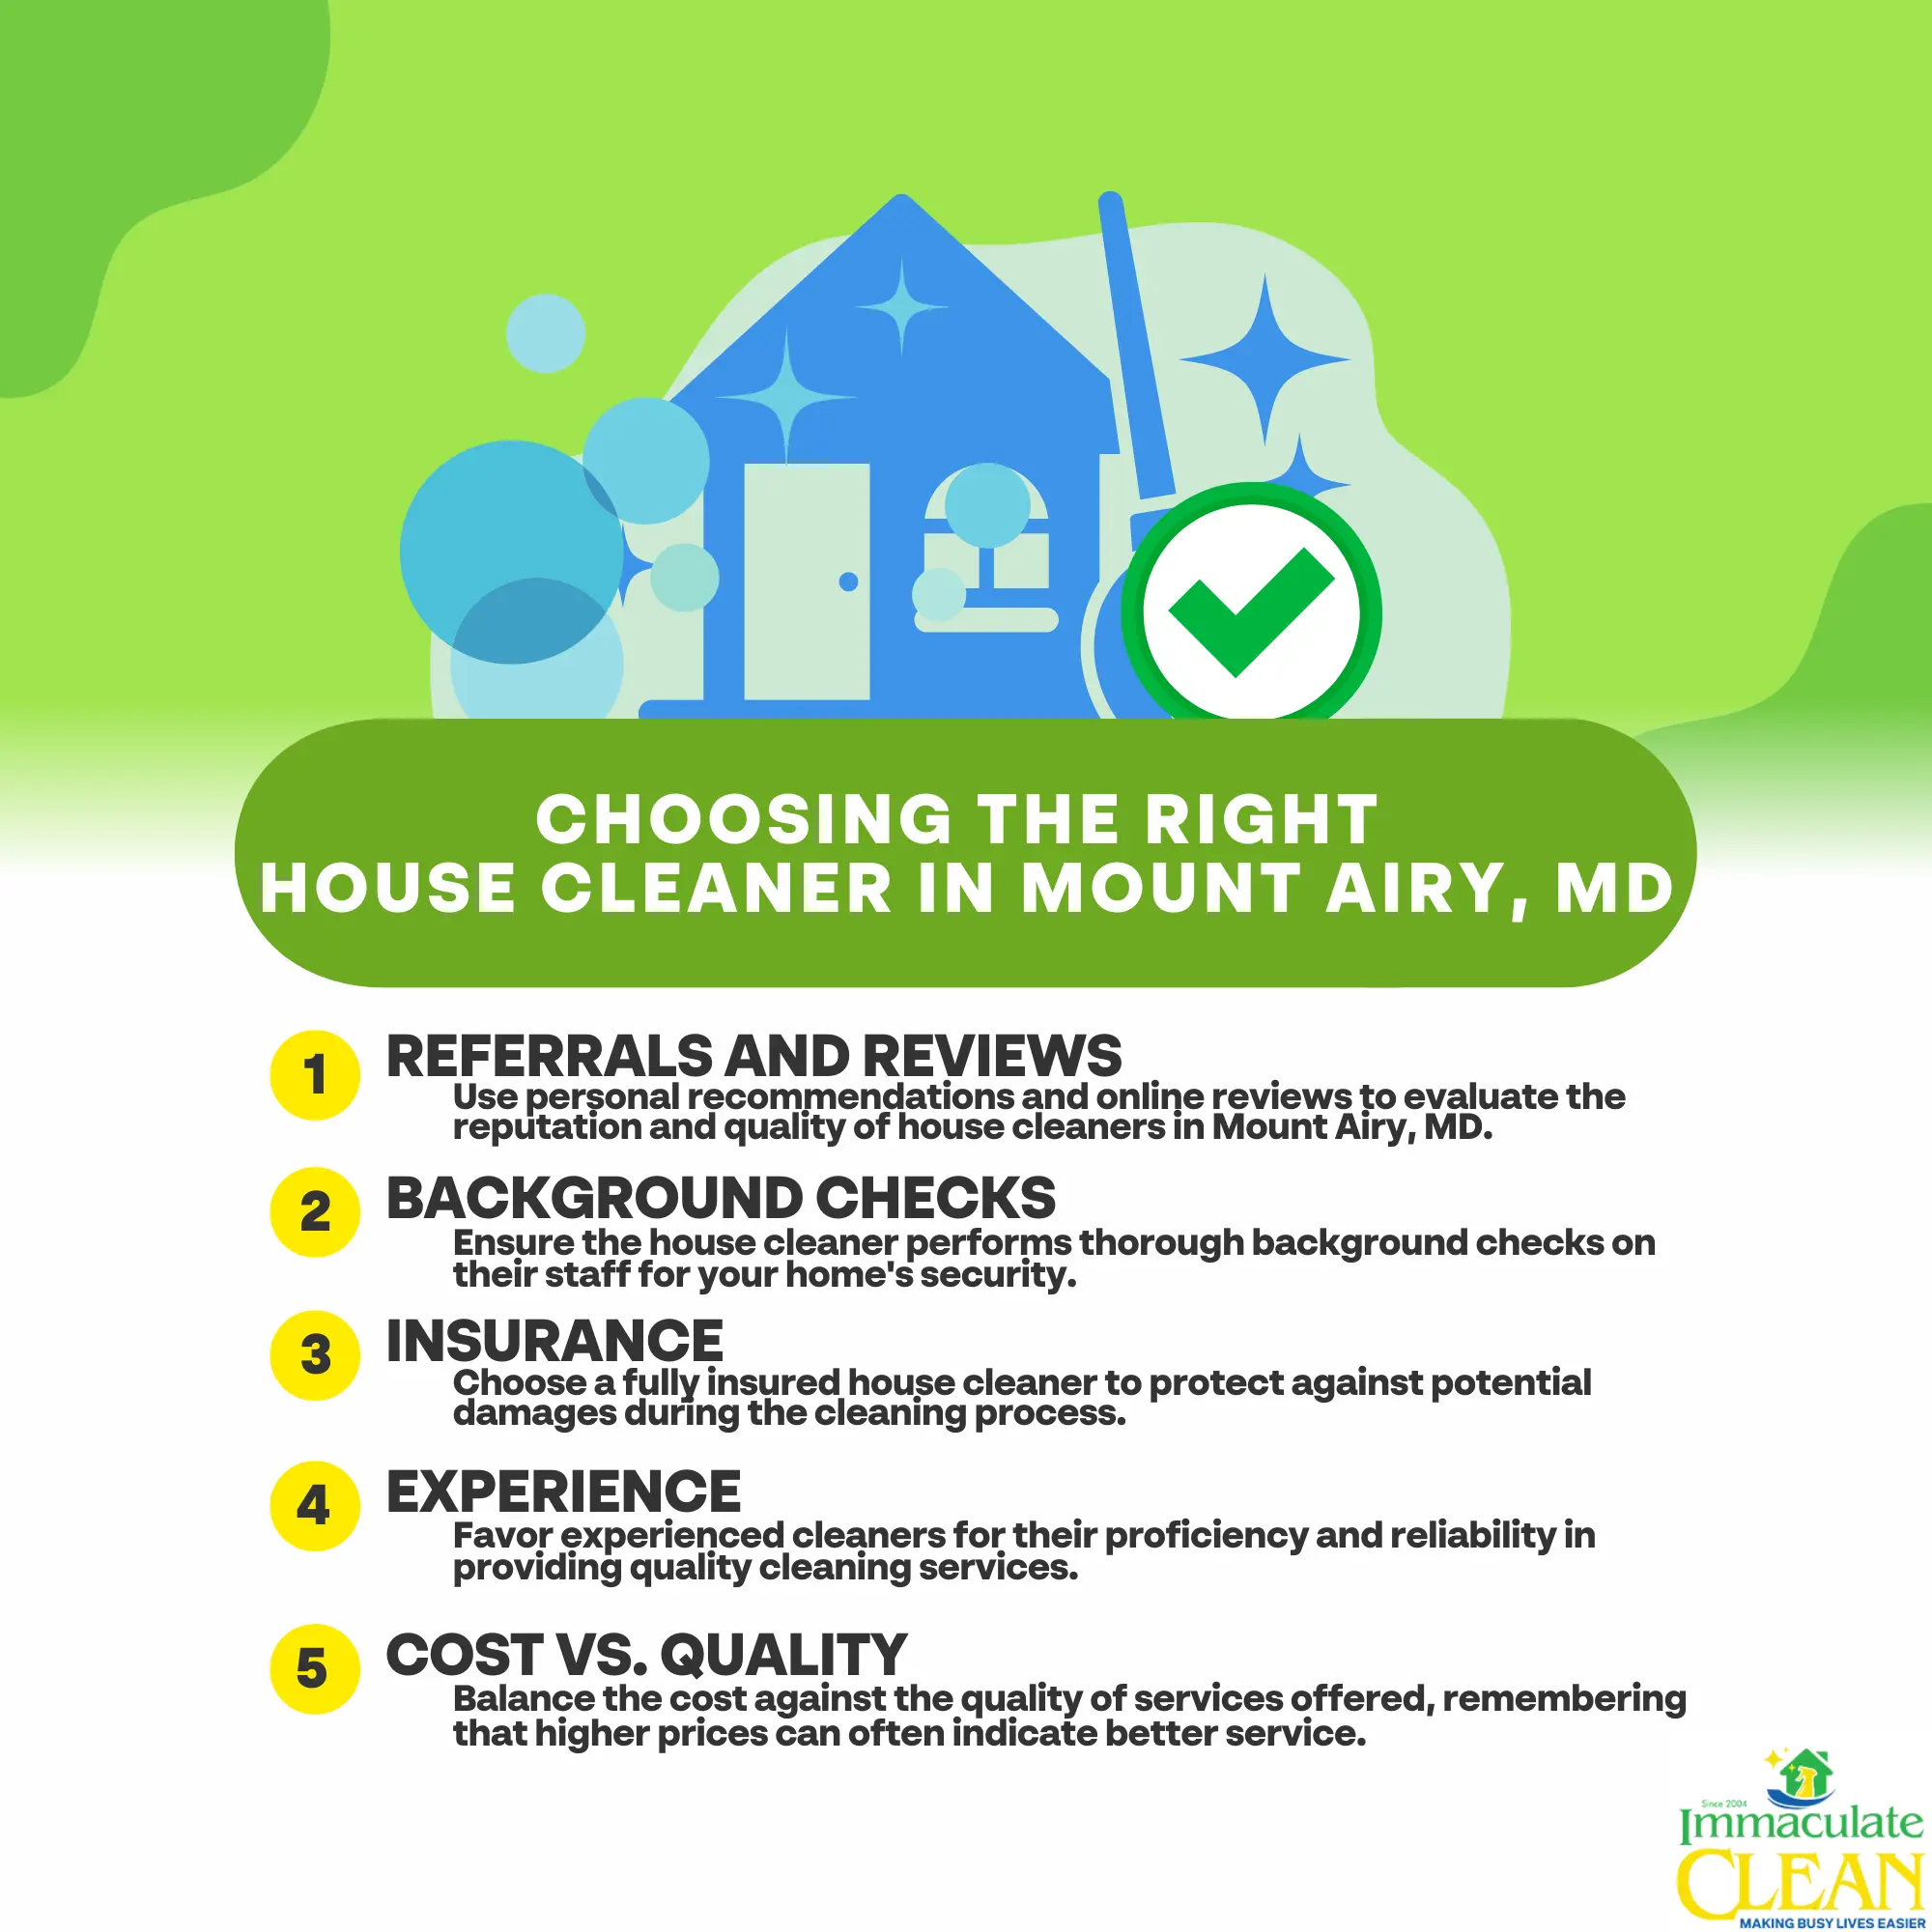 Mount Airy House Cleaner, residential cleaner, cleaners in mount airy, House Cleaner mount airy, house keeper mount airy